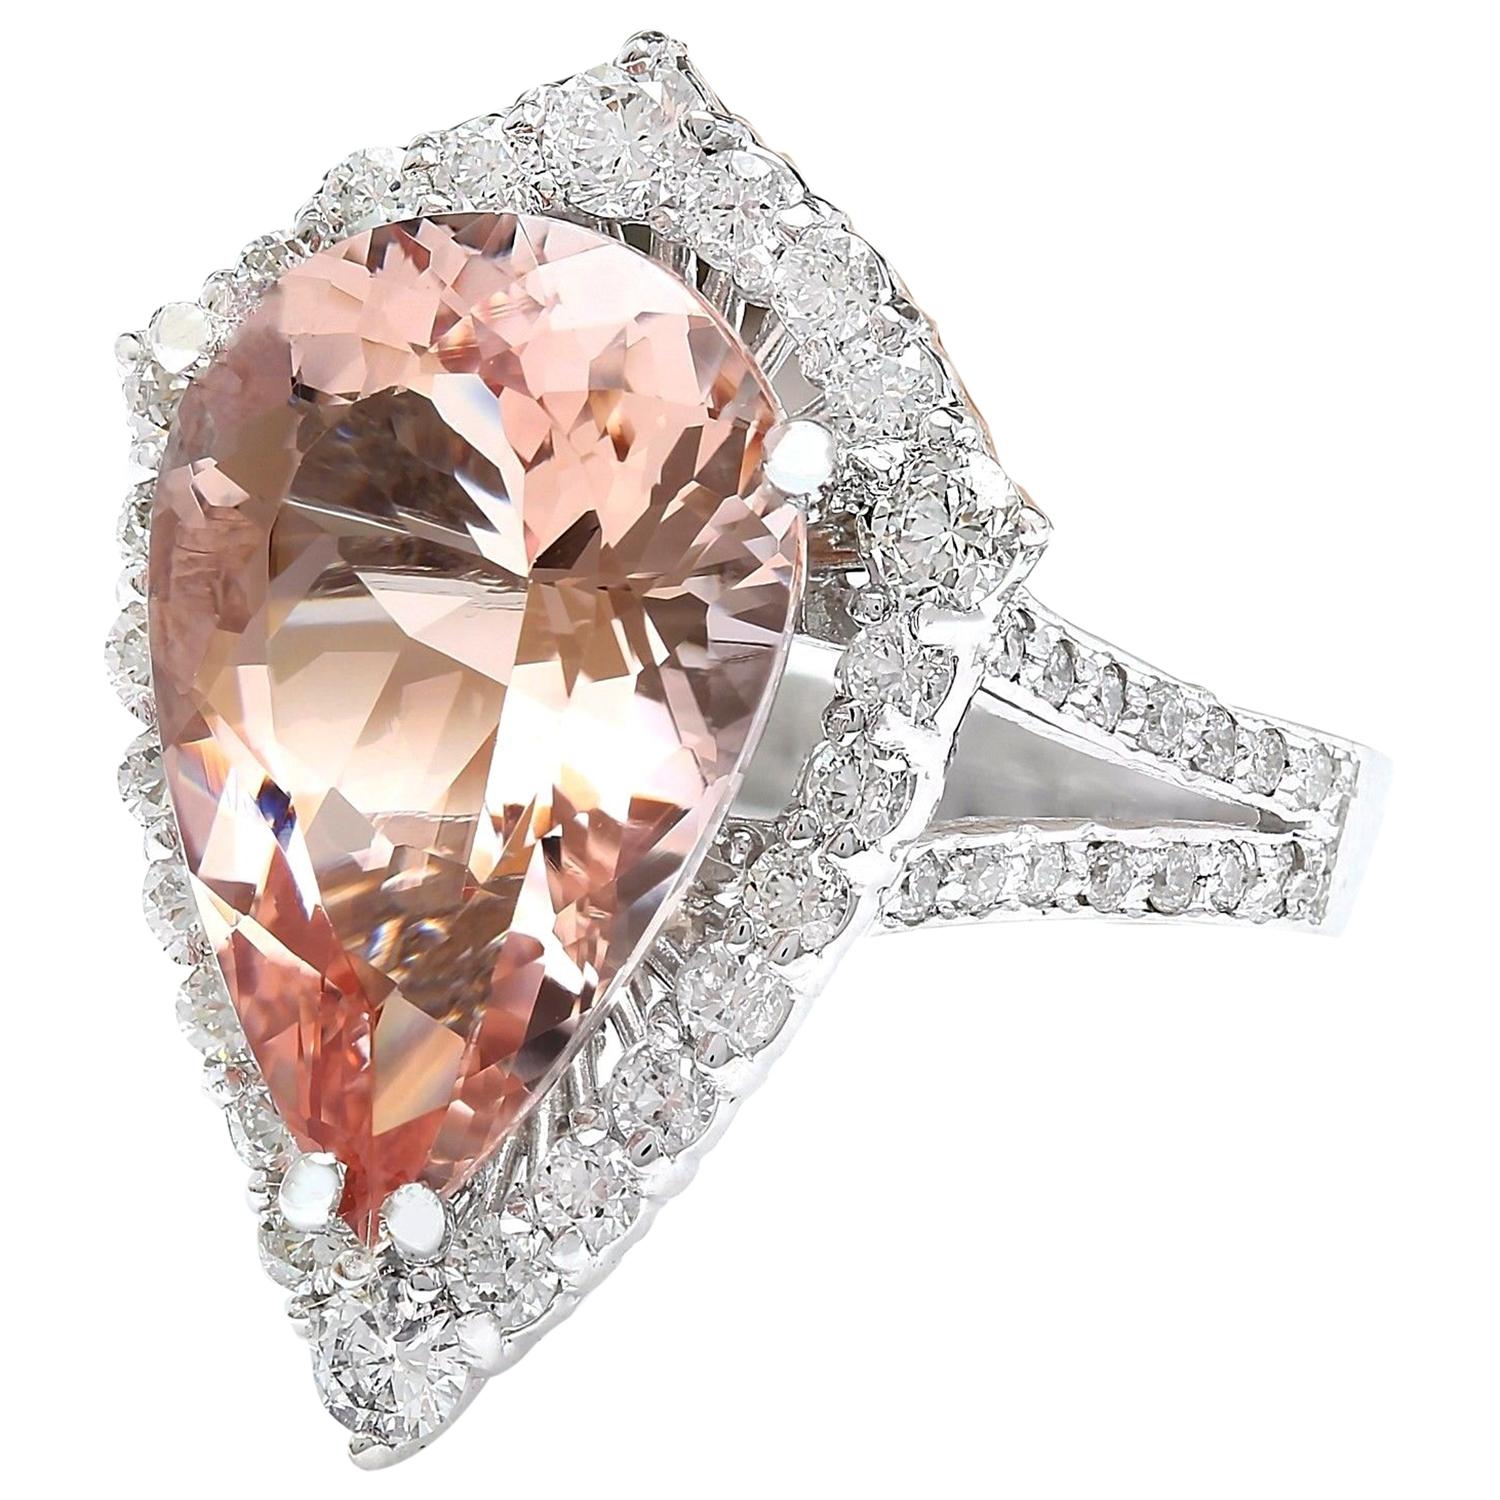 7.49 Carat Natural Morganite 14K Solid White Gold Diamond Ring
 Item Type: Ring
 Item Style: Cocktail
 Material: 14K White Gold
 Mainstone: Morganite
 Stone Color: Peach
 Stone Weight: 6.39 Carat
 Stone Shape: Pear
 Stone Quantity: 1
 Stone